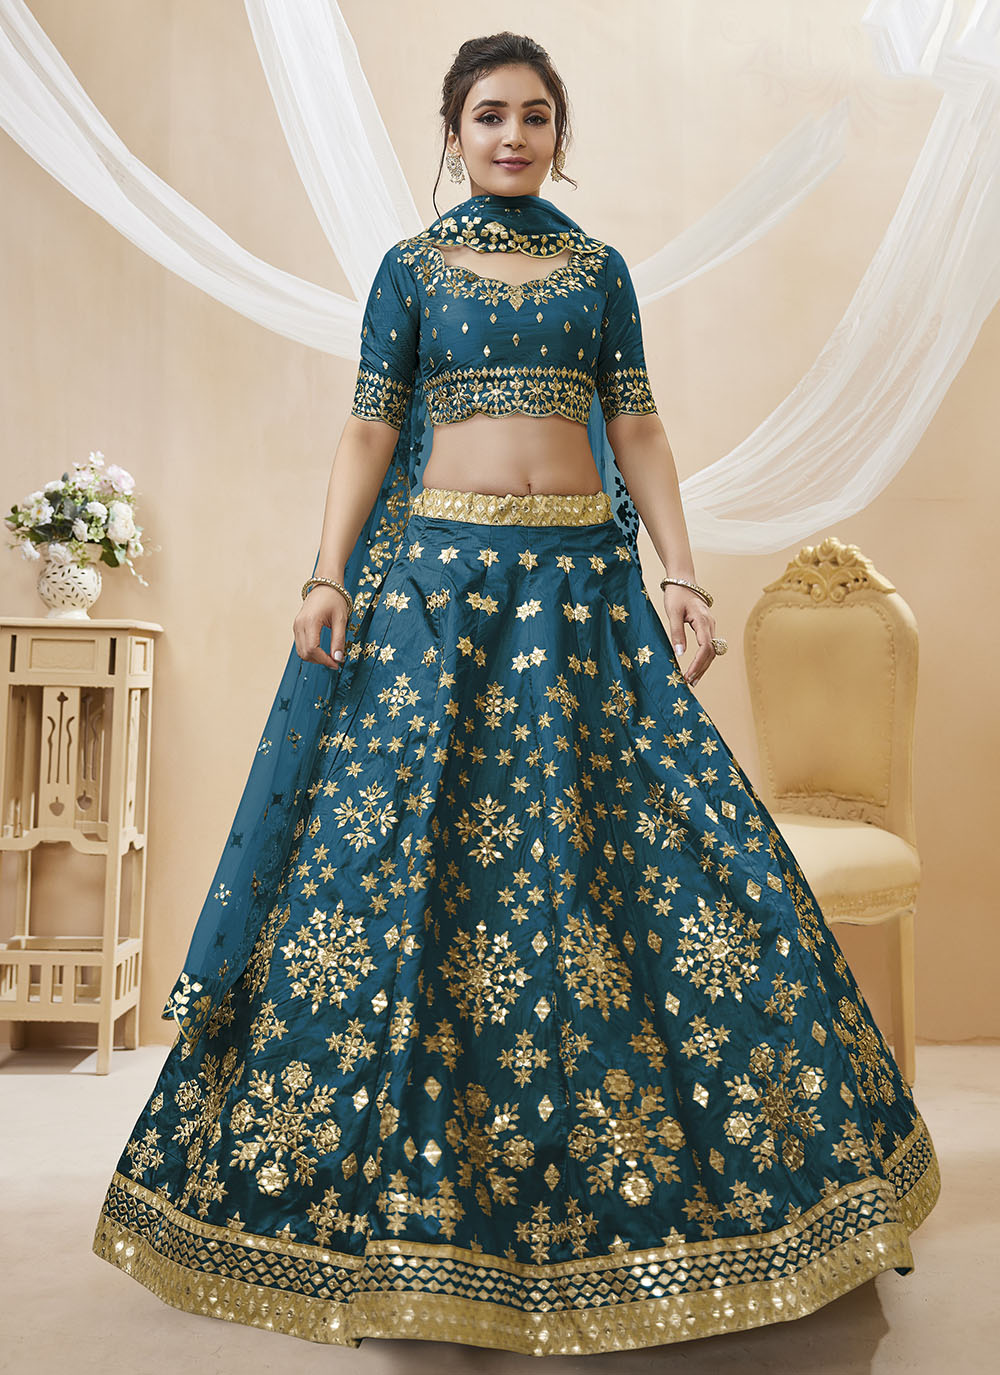 Take This Indian Wedding Dress Quiz To Find Your Perfect Bridal Lehenga